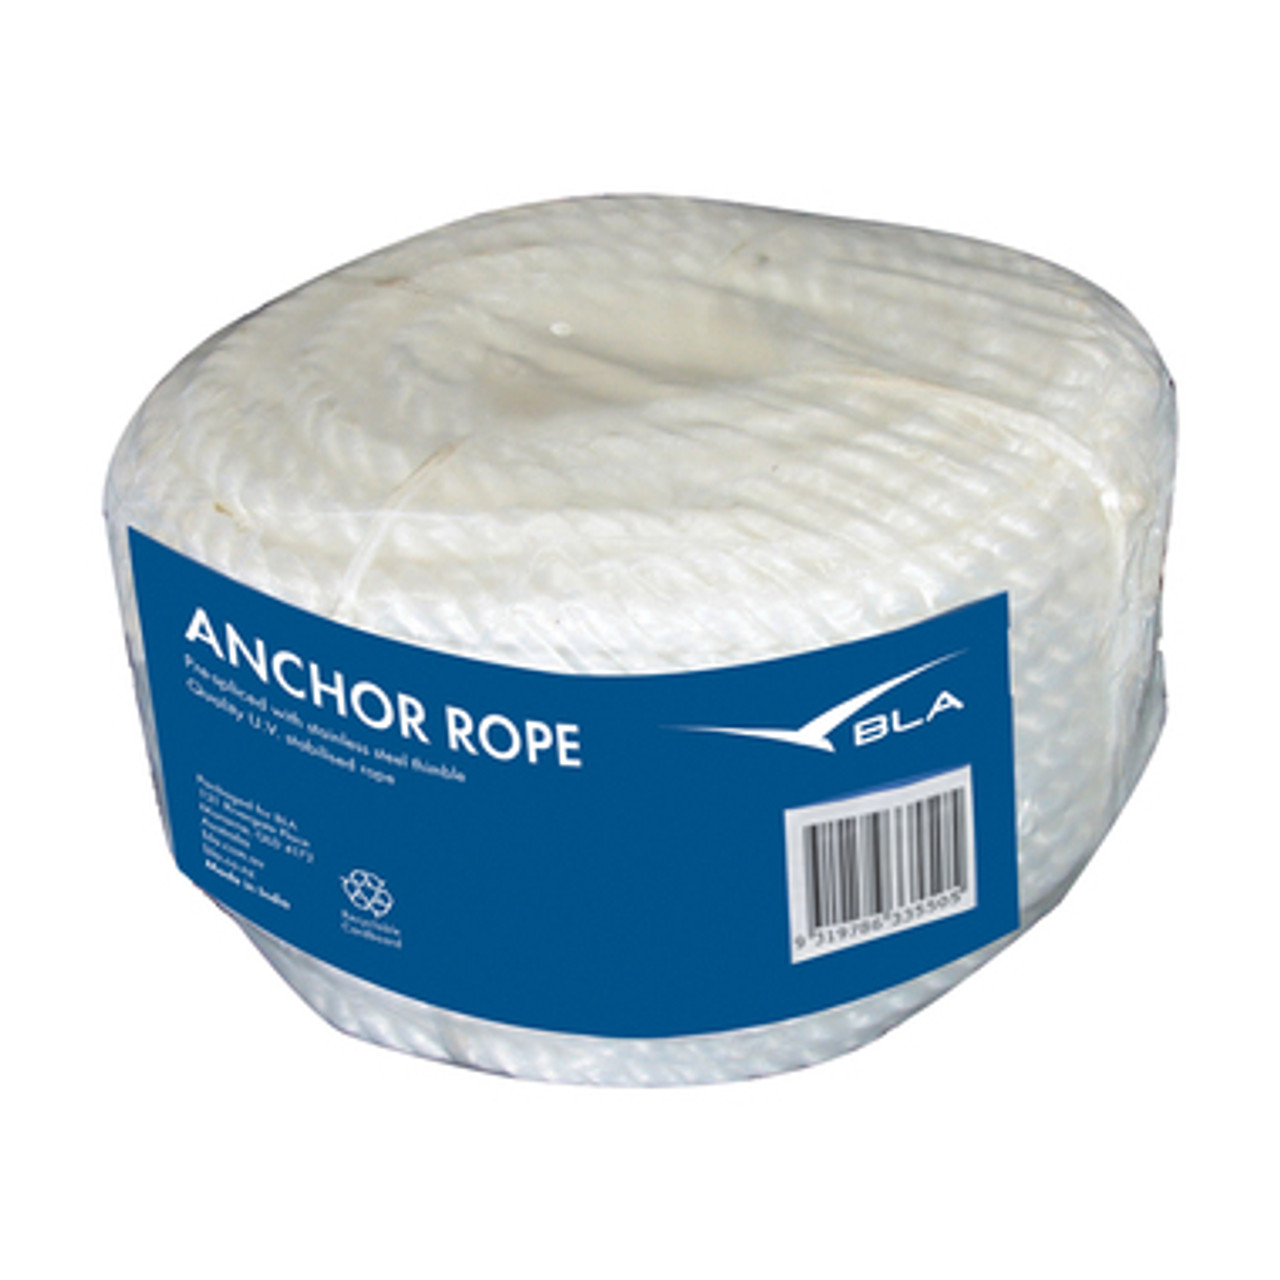 10mm x 110m Silver Anchor Rope Coil